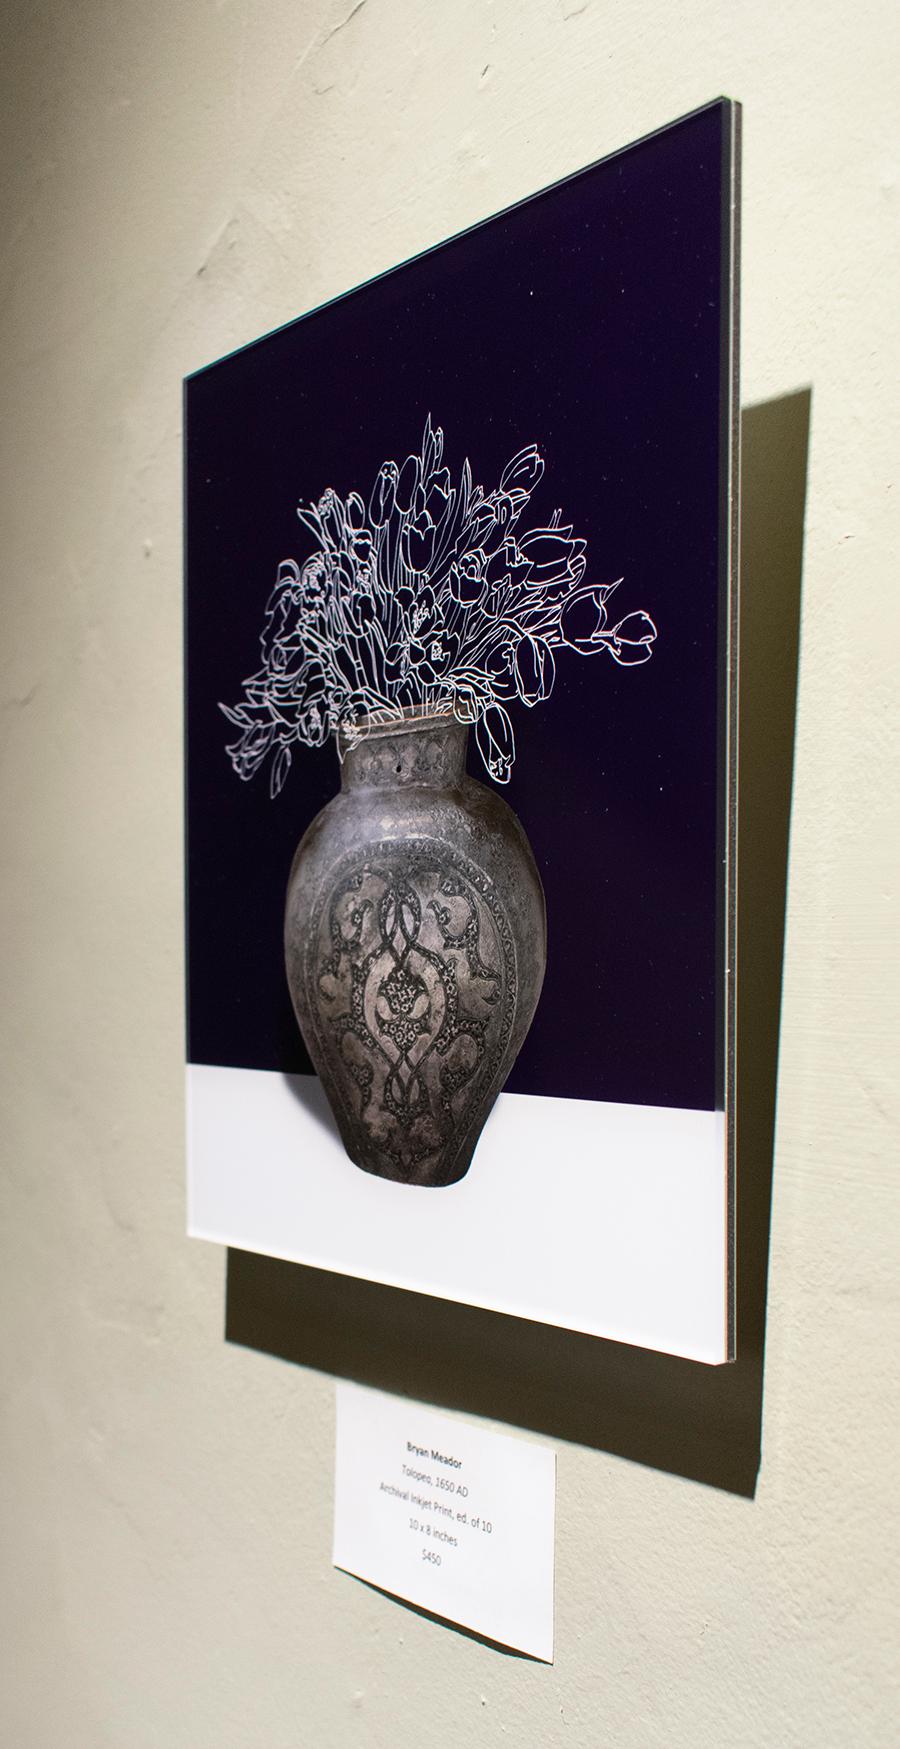 Tolopea (Abstracted Flower Still Life Photograph Antique Vase on Dark Blue) - Black Color Photograph by Bryan Meador